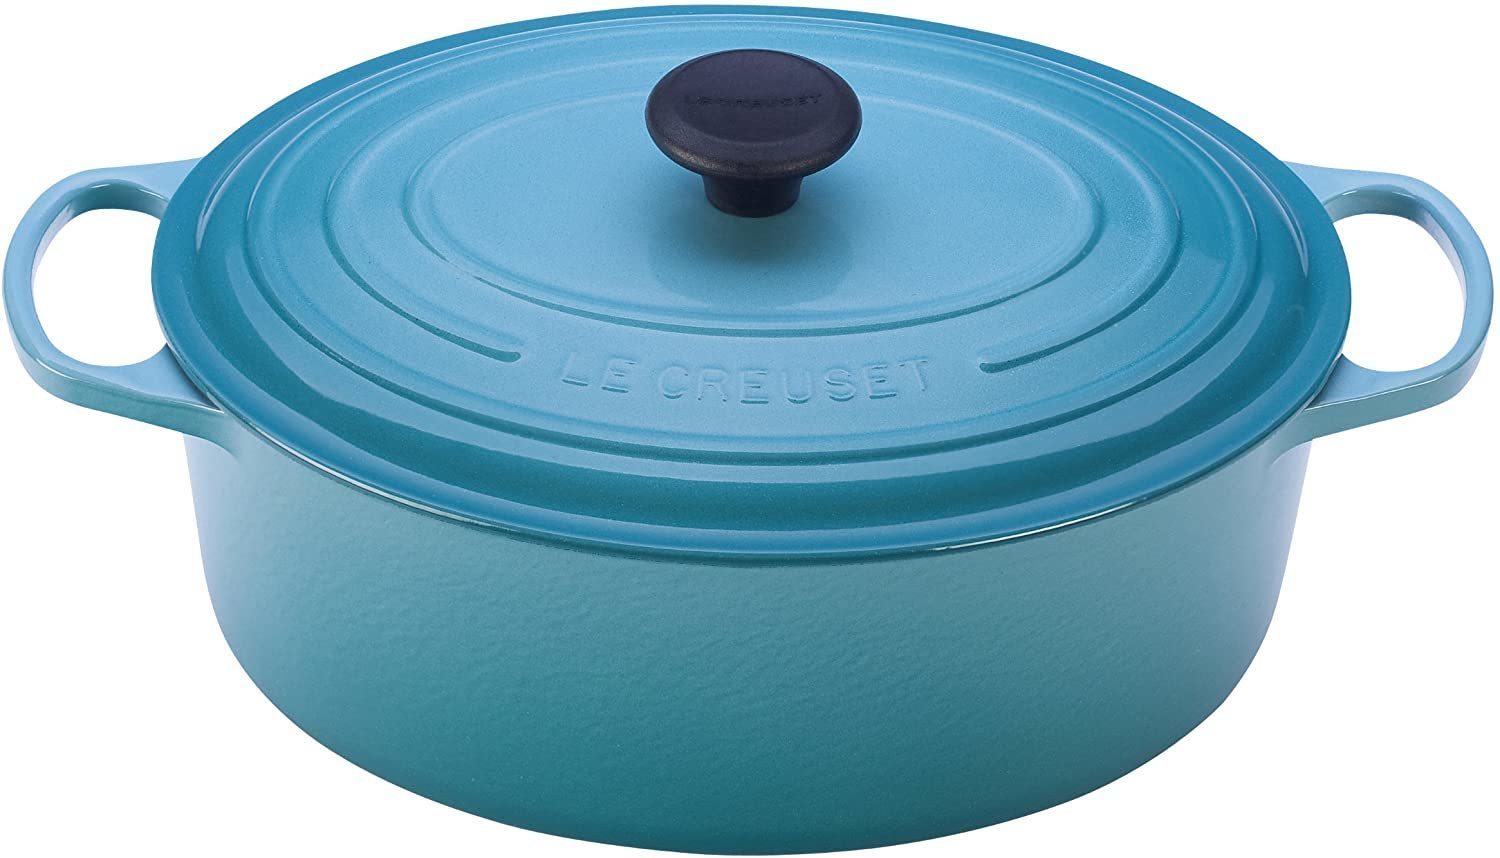 Le Creuset Cast Iron French Oven